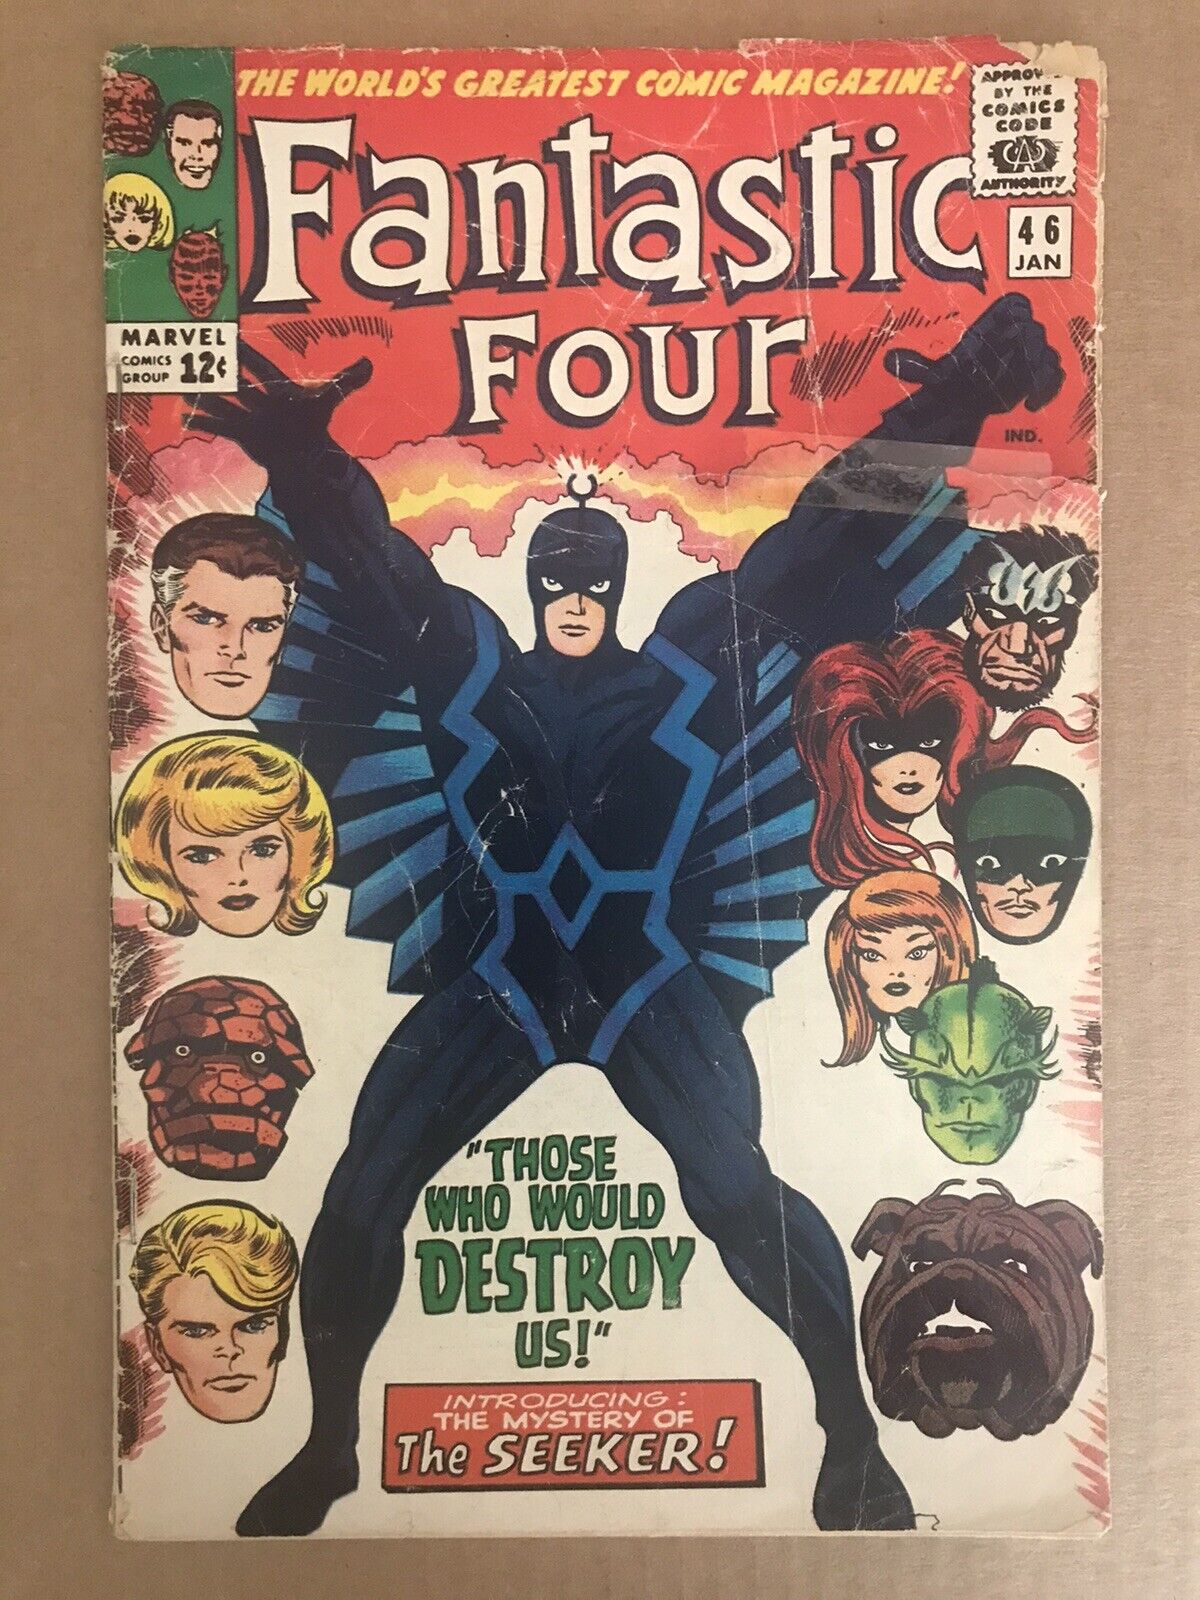 Fantastic Four #46 1966 First Printing Marvel Comic Book